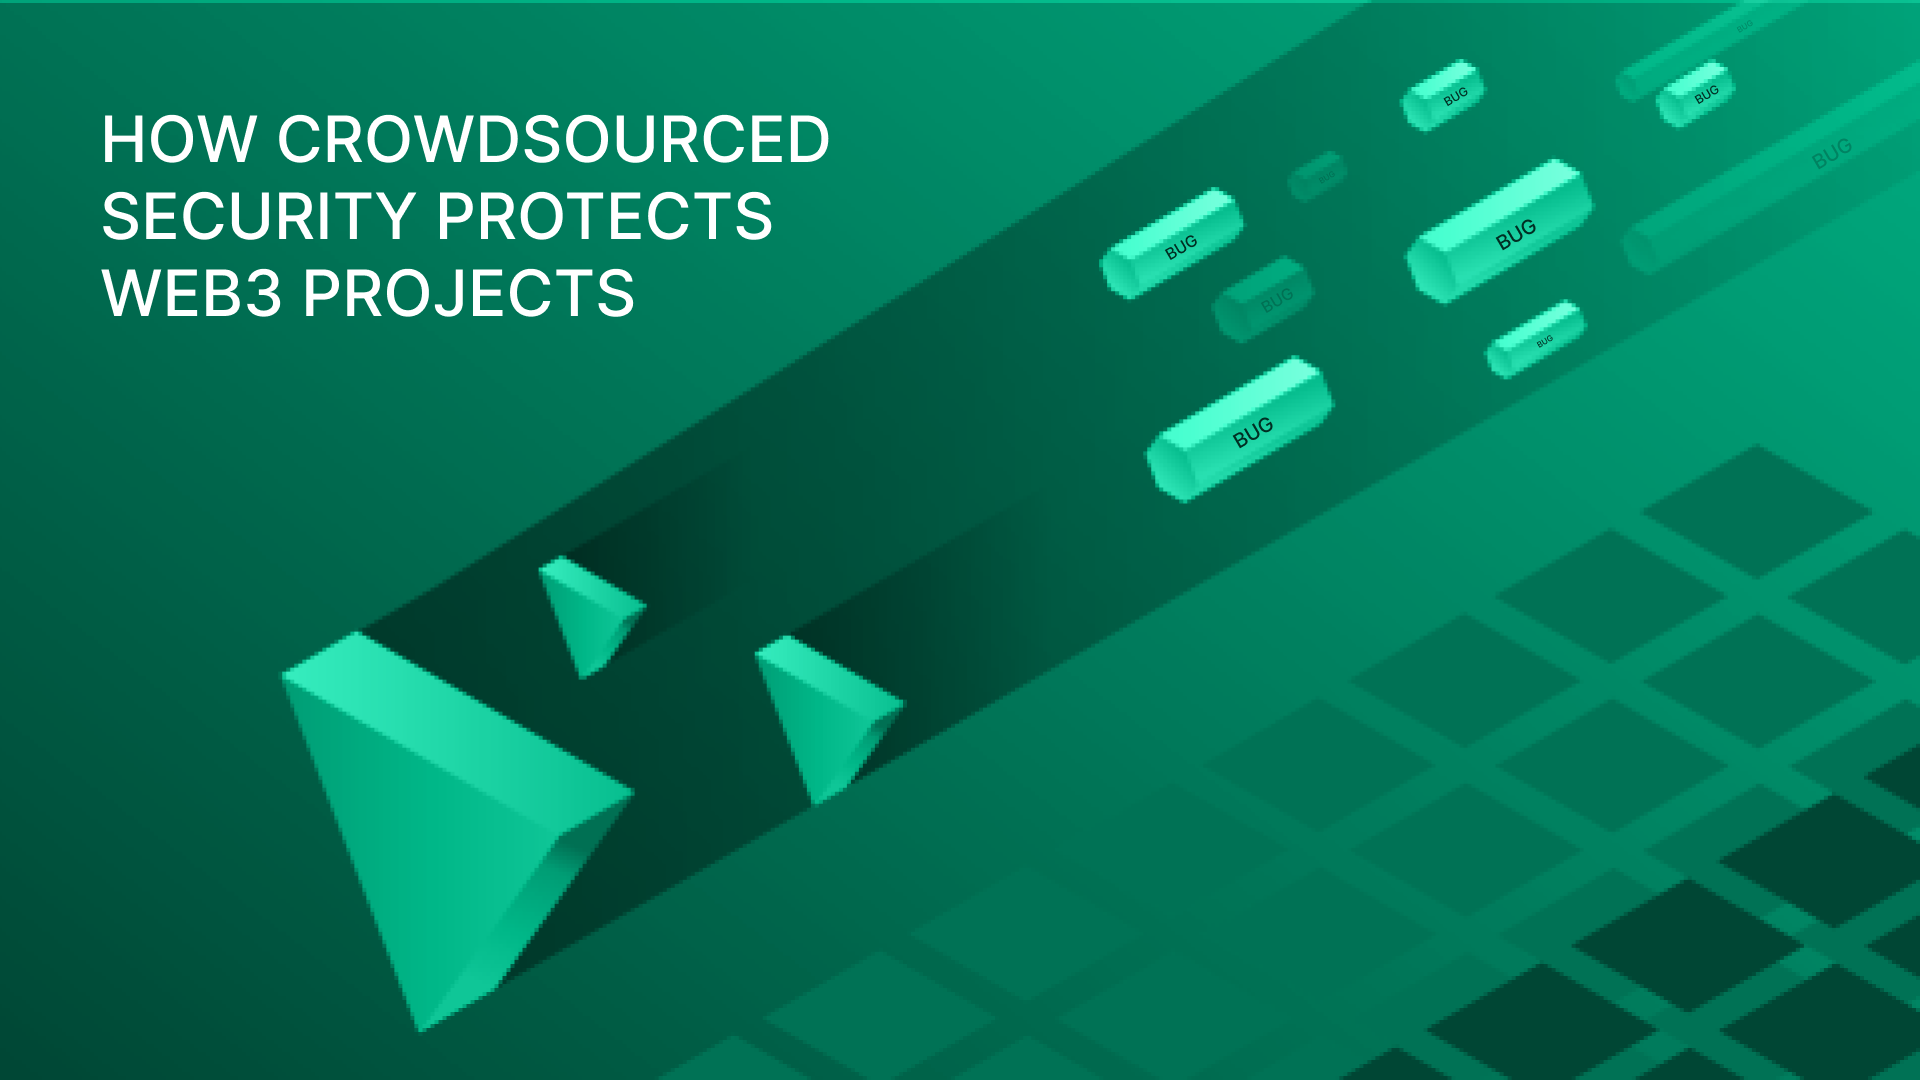 How Crowdsourced Security Protects Web3 Projects